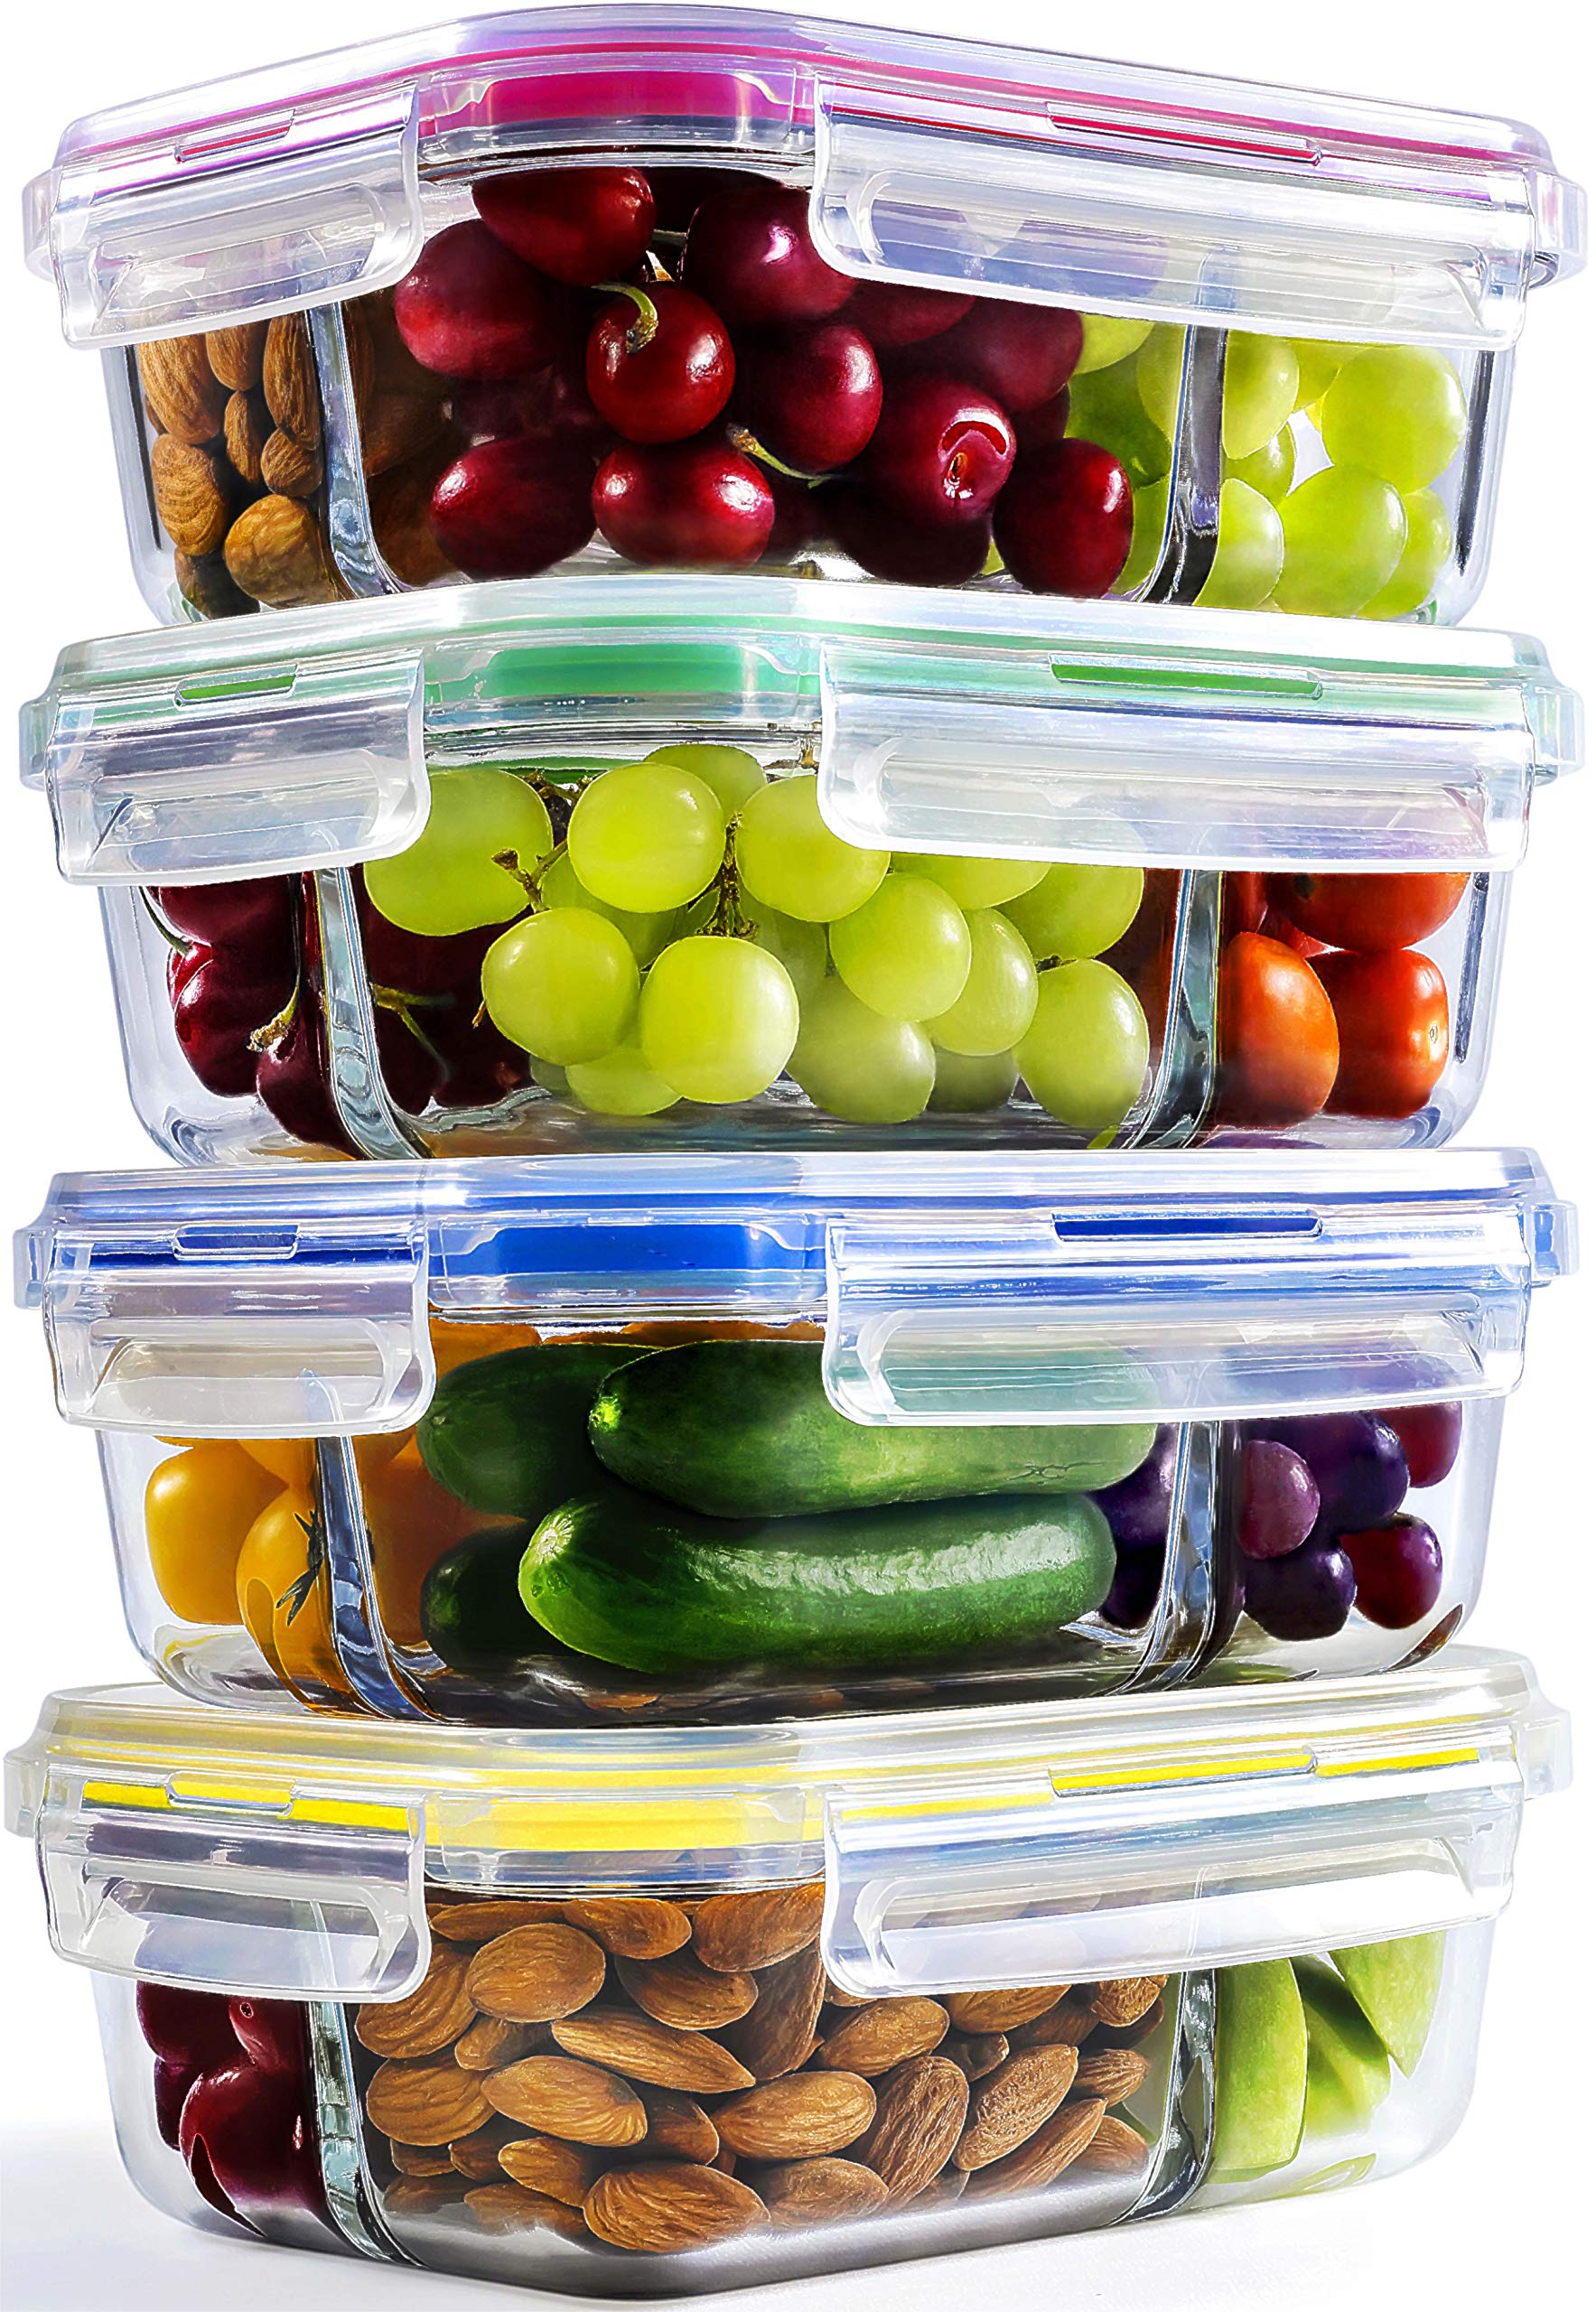 Glass Meal Prep Containers - 4-Pack 35 Oz. 3 Compartment Bento Box Lunch Containers | Bento Lunch Box Portion Control Containers | 3 Compartment Food Containers